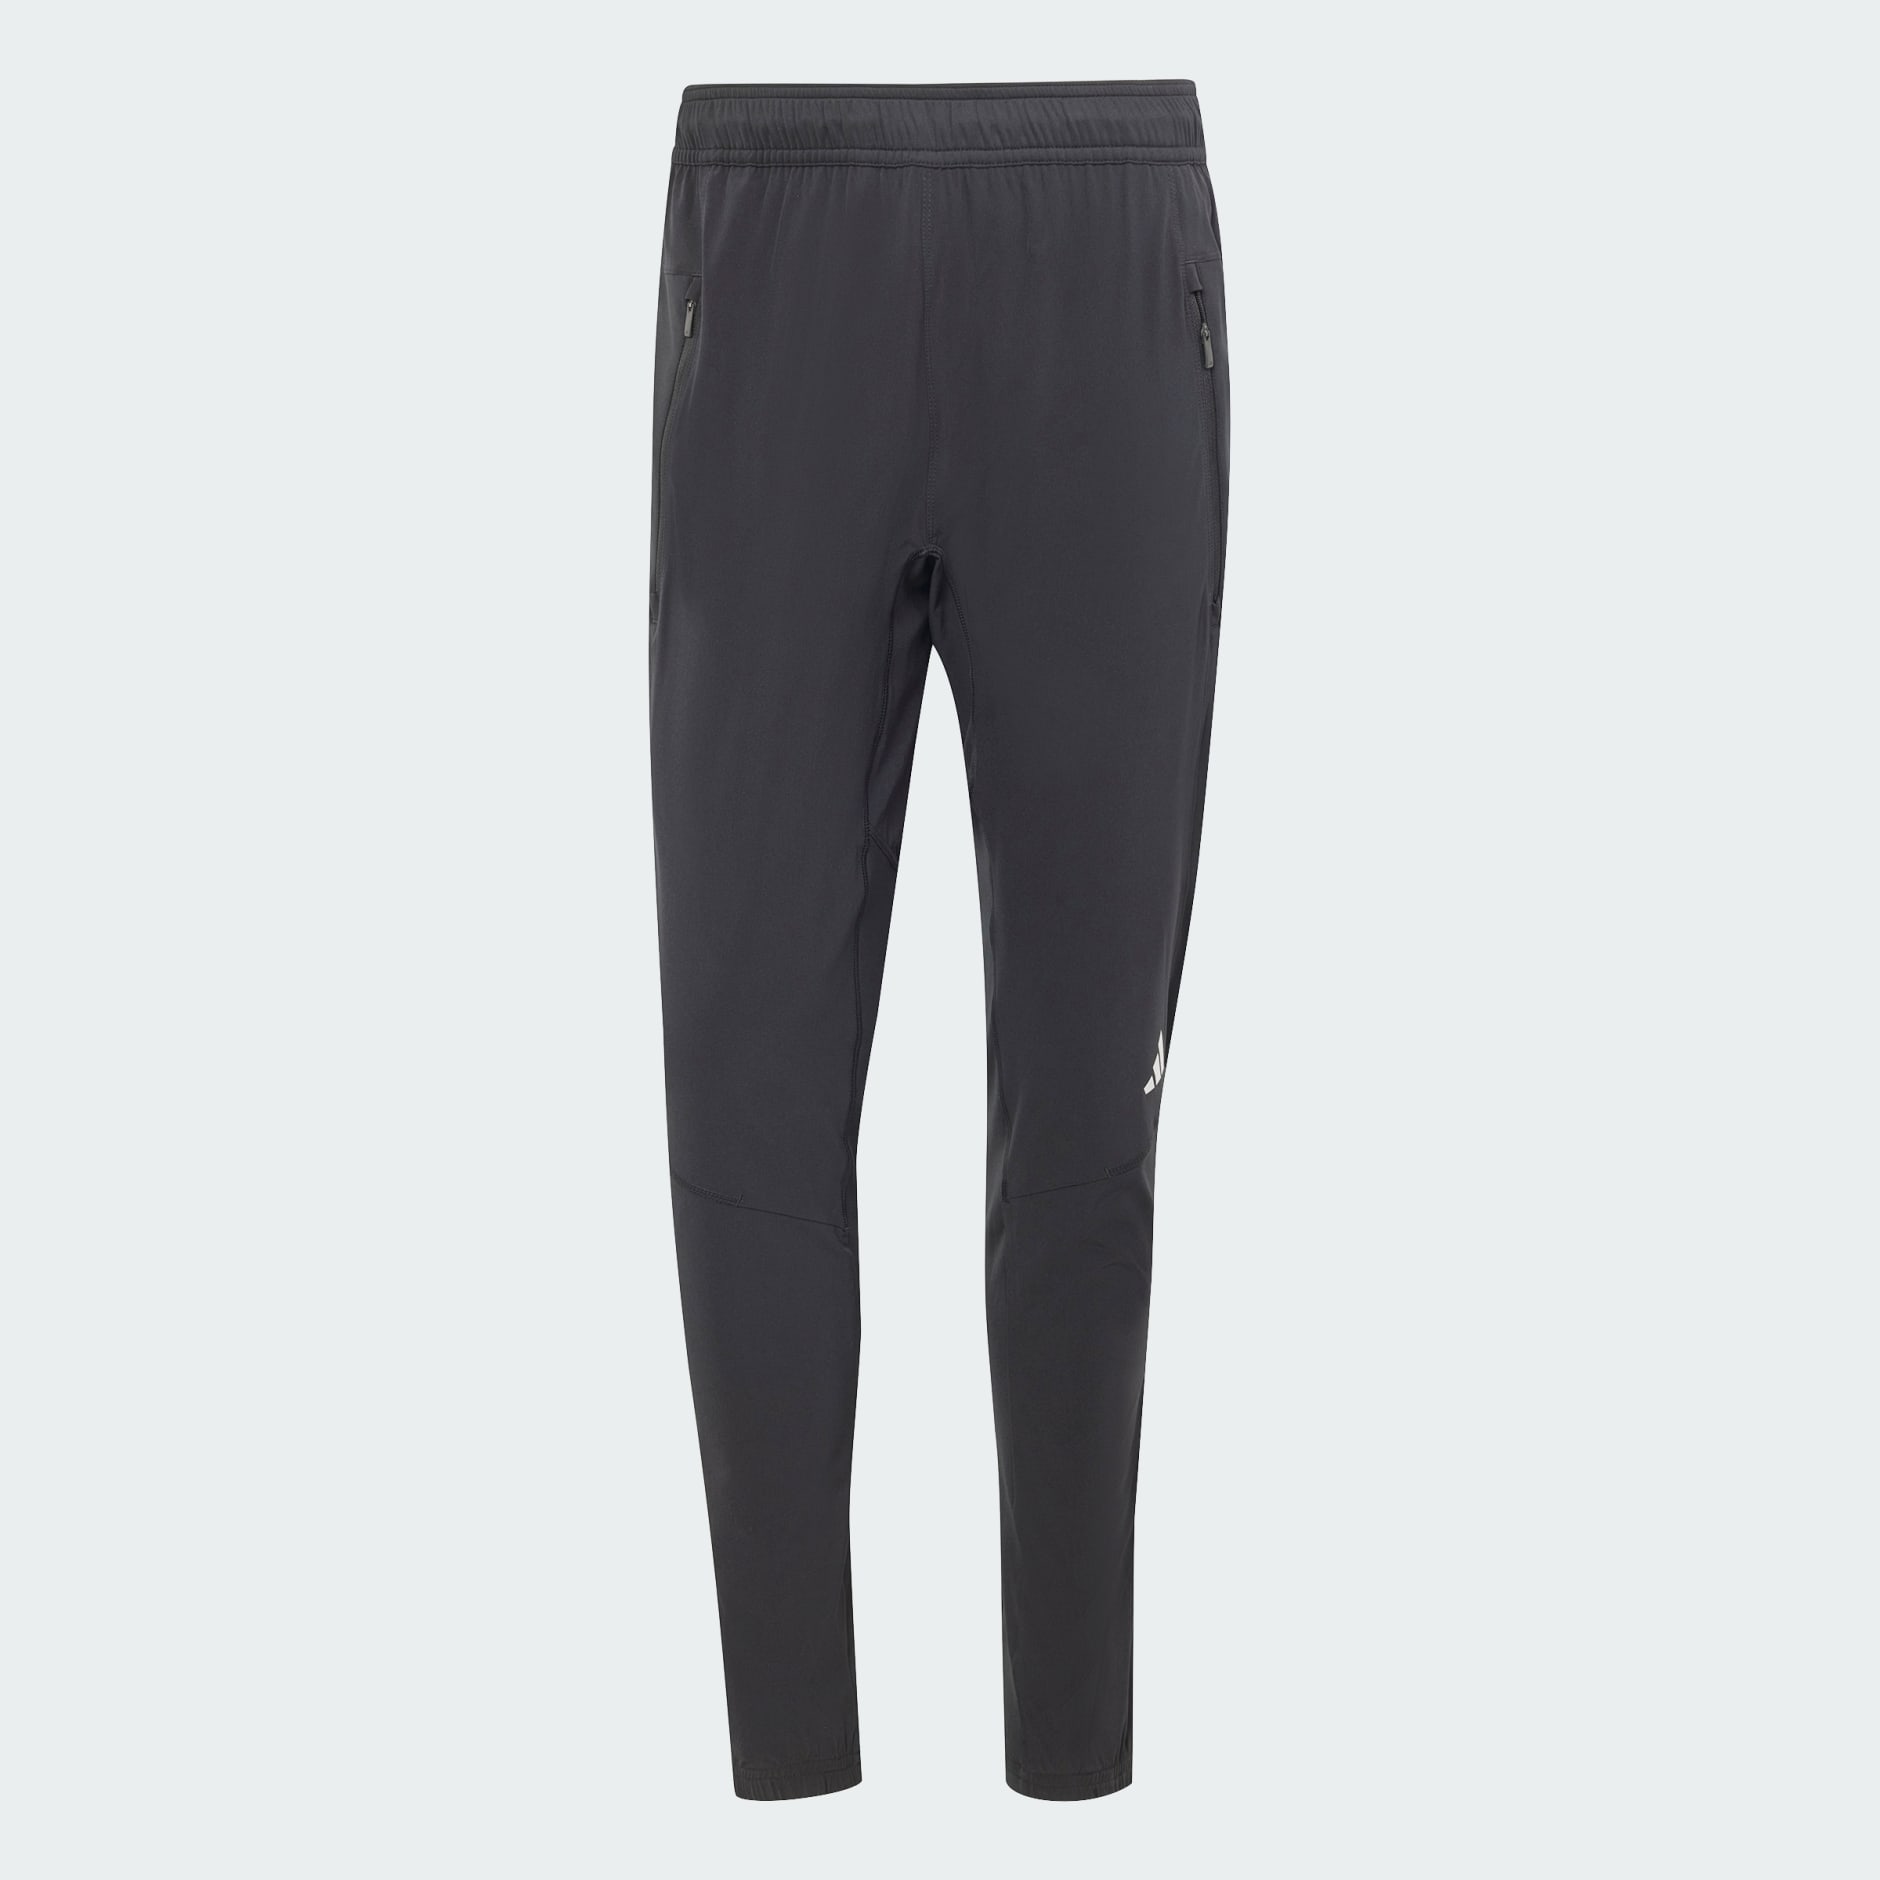 Reebok Women's Focus Track Woven Pants with Front Pockets and Back